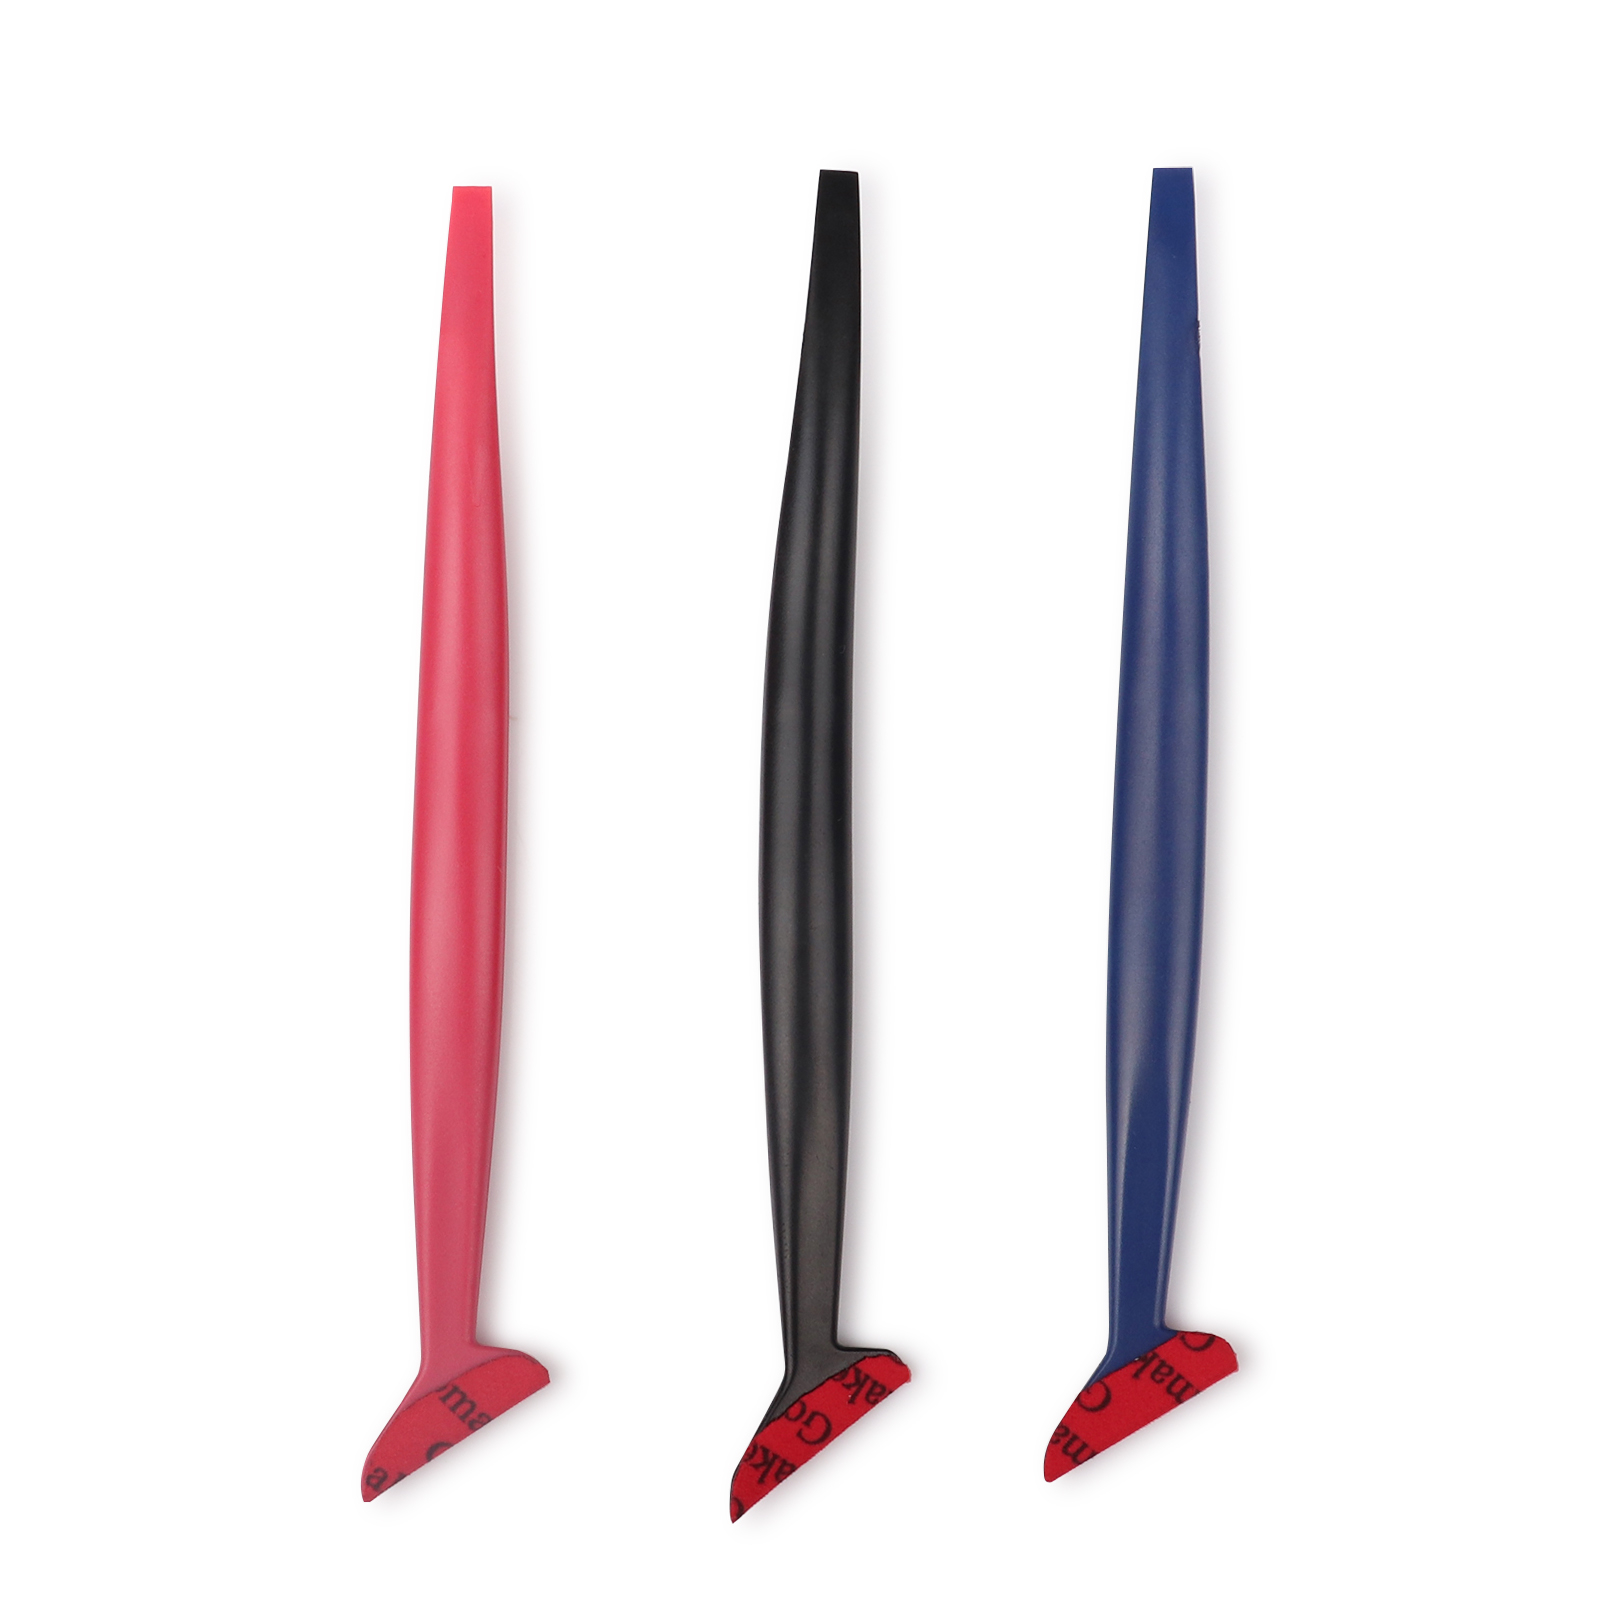 3 in 1 Micro Mini Squeegee Tucking Tools with Red Felt (Soft / Medium / Hard)